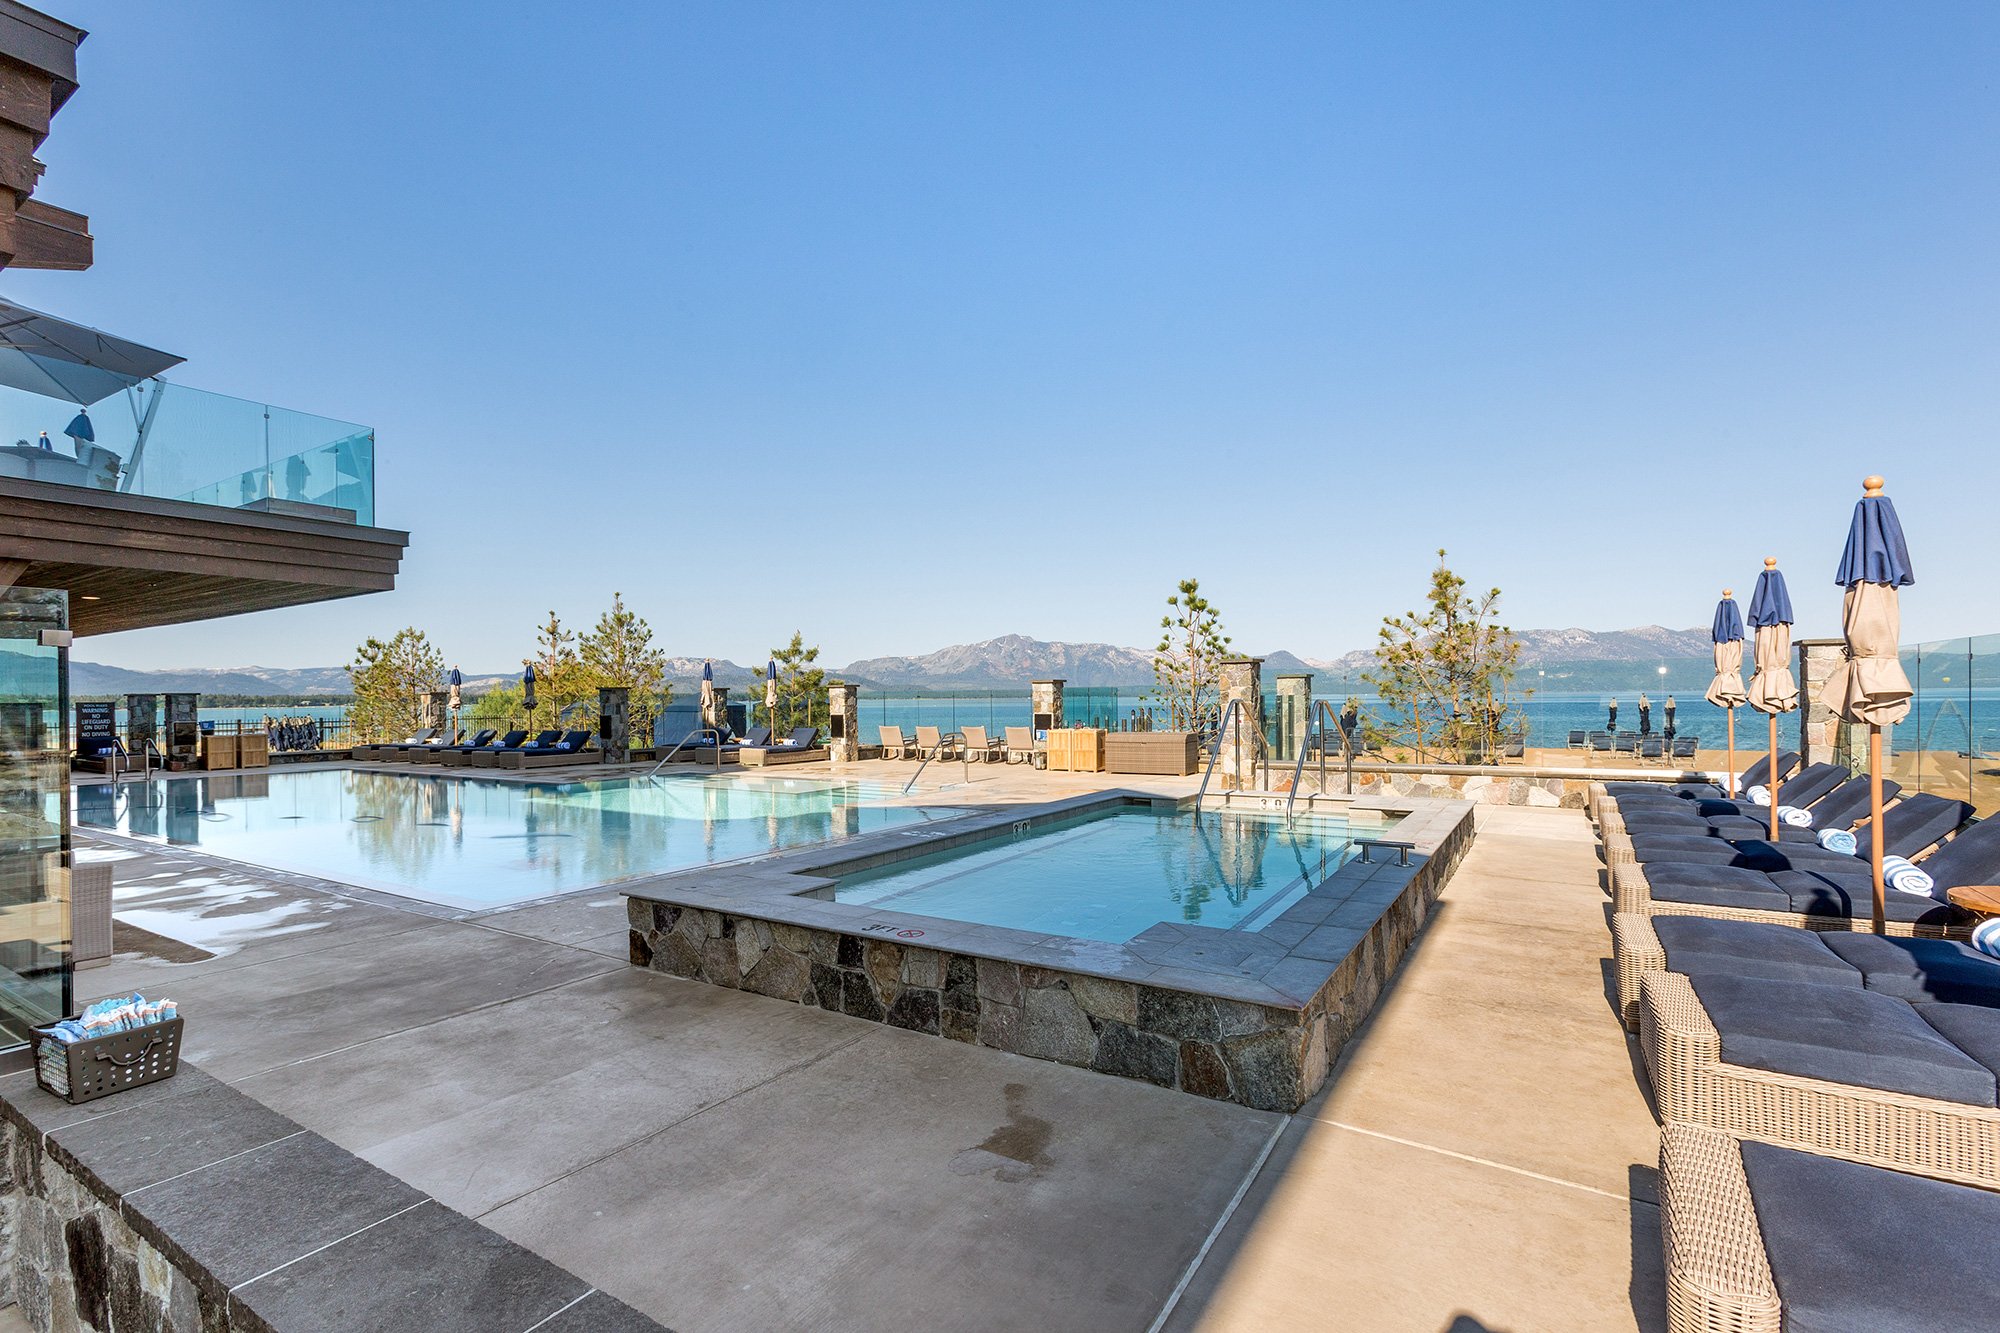 Relaxing pool area at the lakefront resort, showcasing a stunning view of serene Lake Tahoe and the surrounding Sierras. (Copy) (Copy)